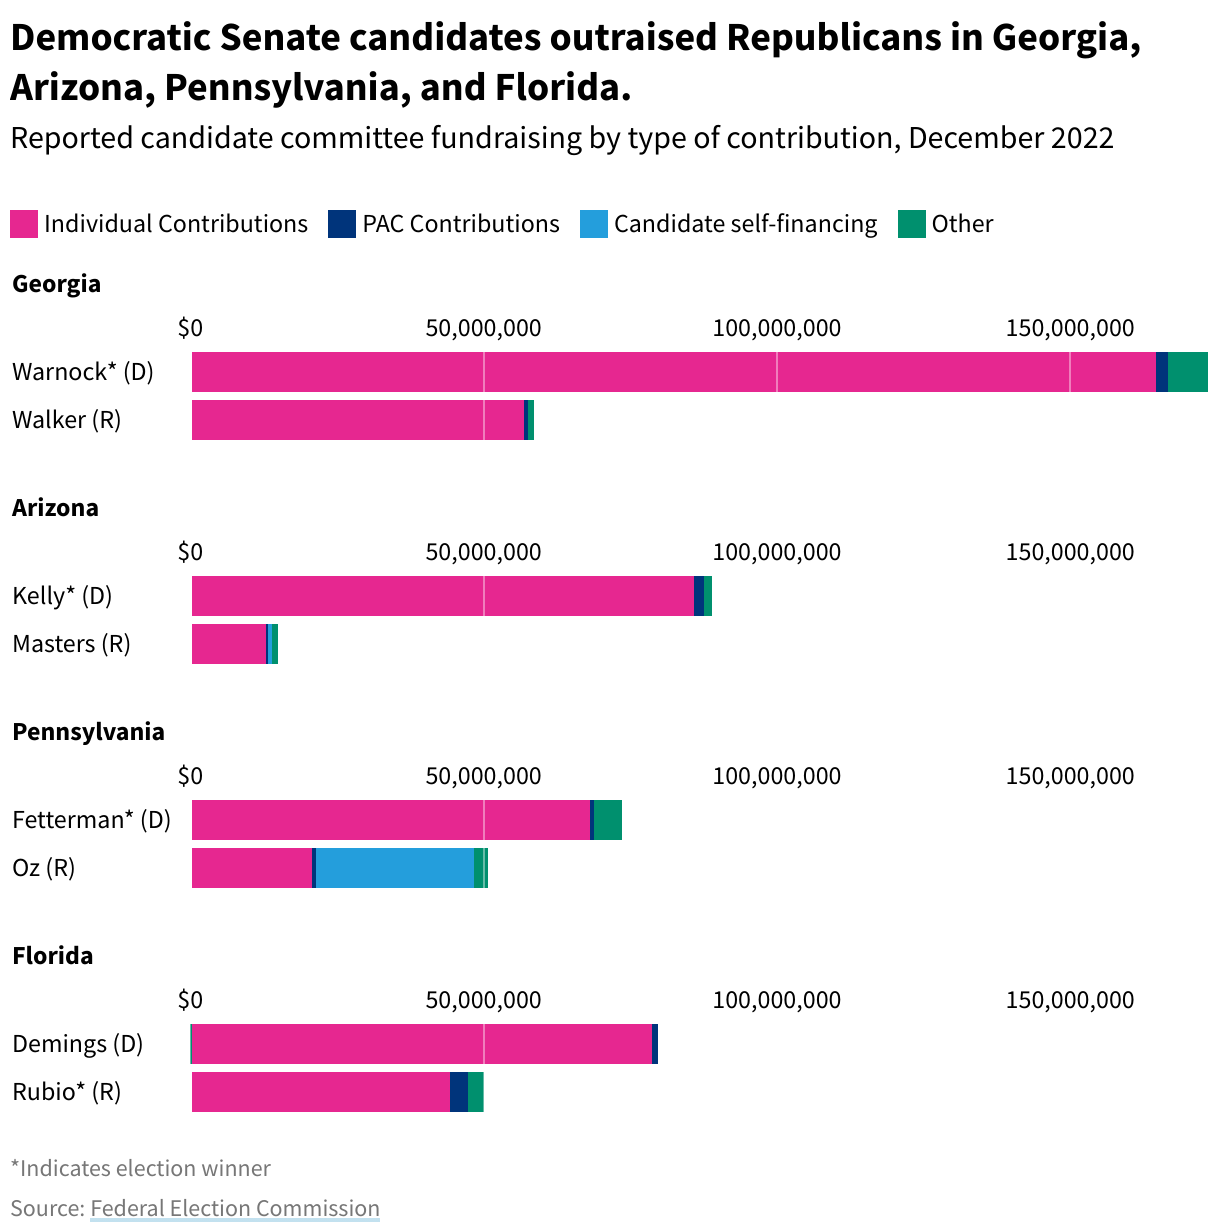 Chart of Reported candidate committee fundraising by type of contribution, December 2022. Democratic campaign committees outraised Republicans in Georgia, Arizona, Pennsylvania, and Florida.